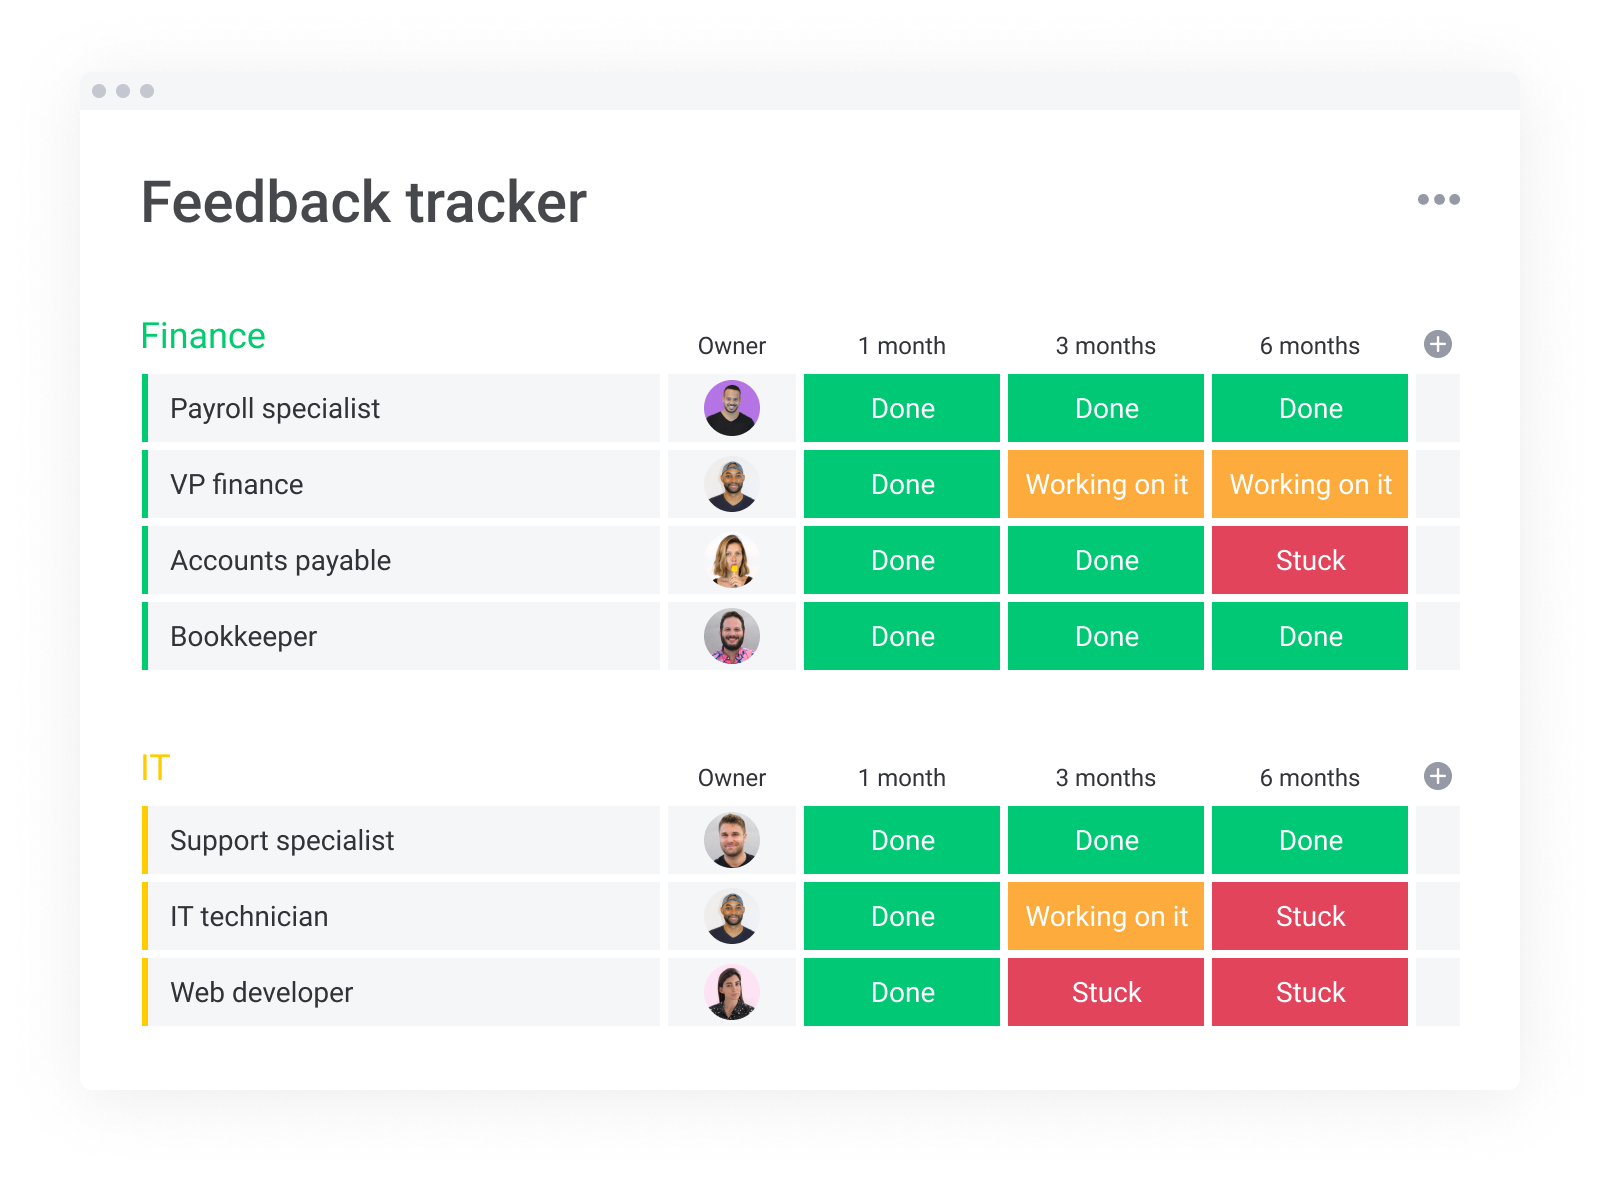 staging-mondaycomblog.kinsta.cloud's example of a feedback tracker